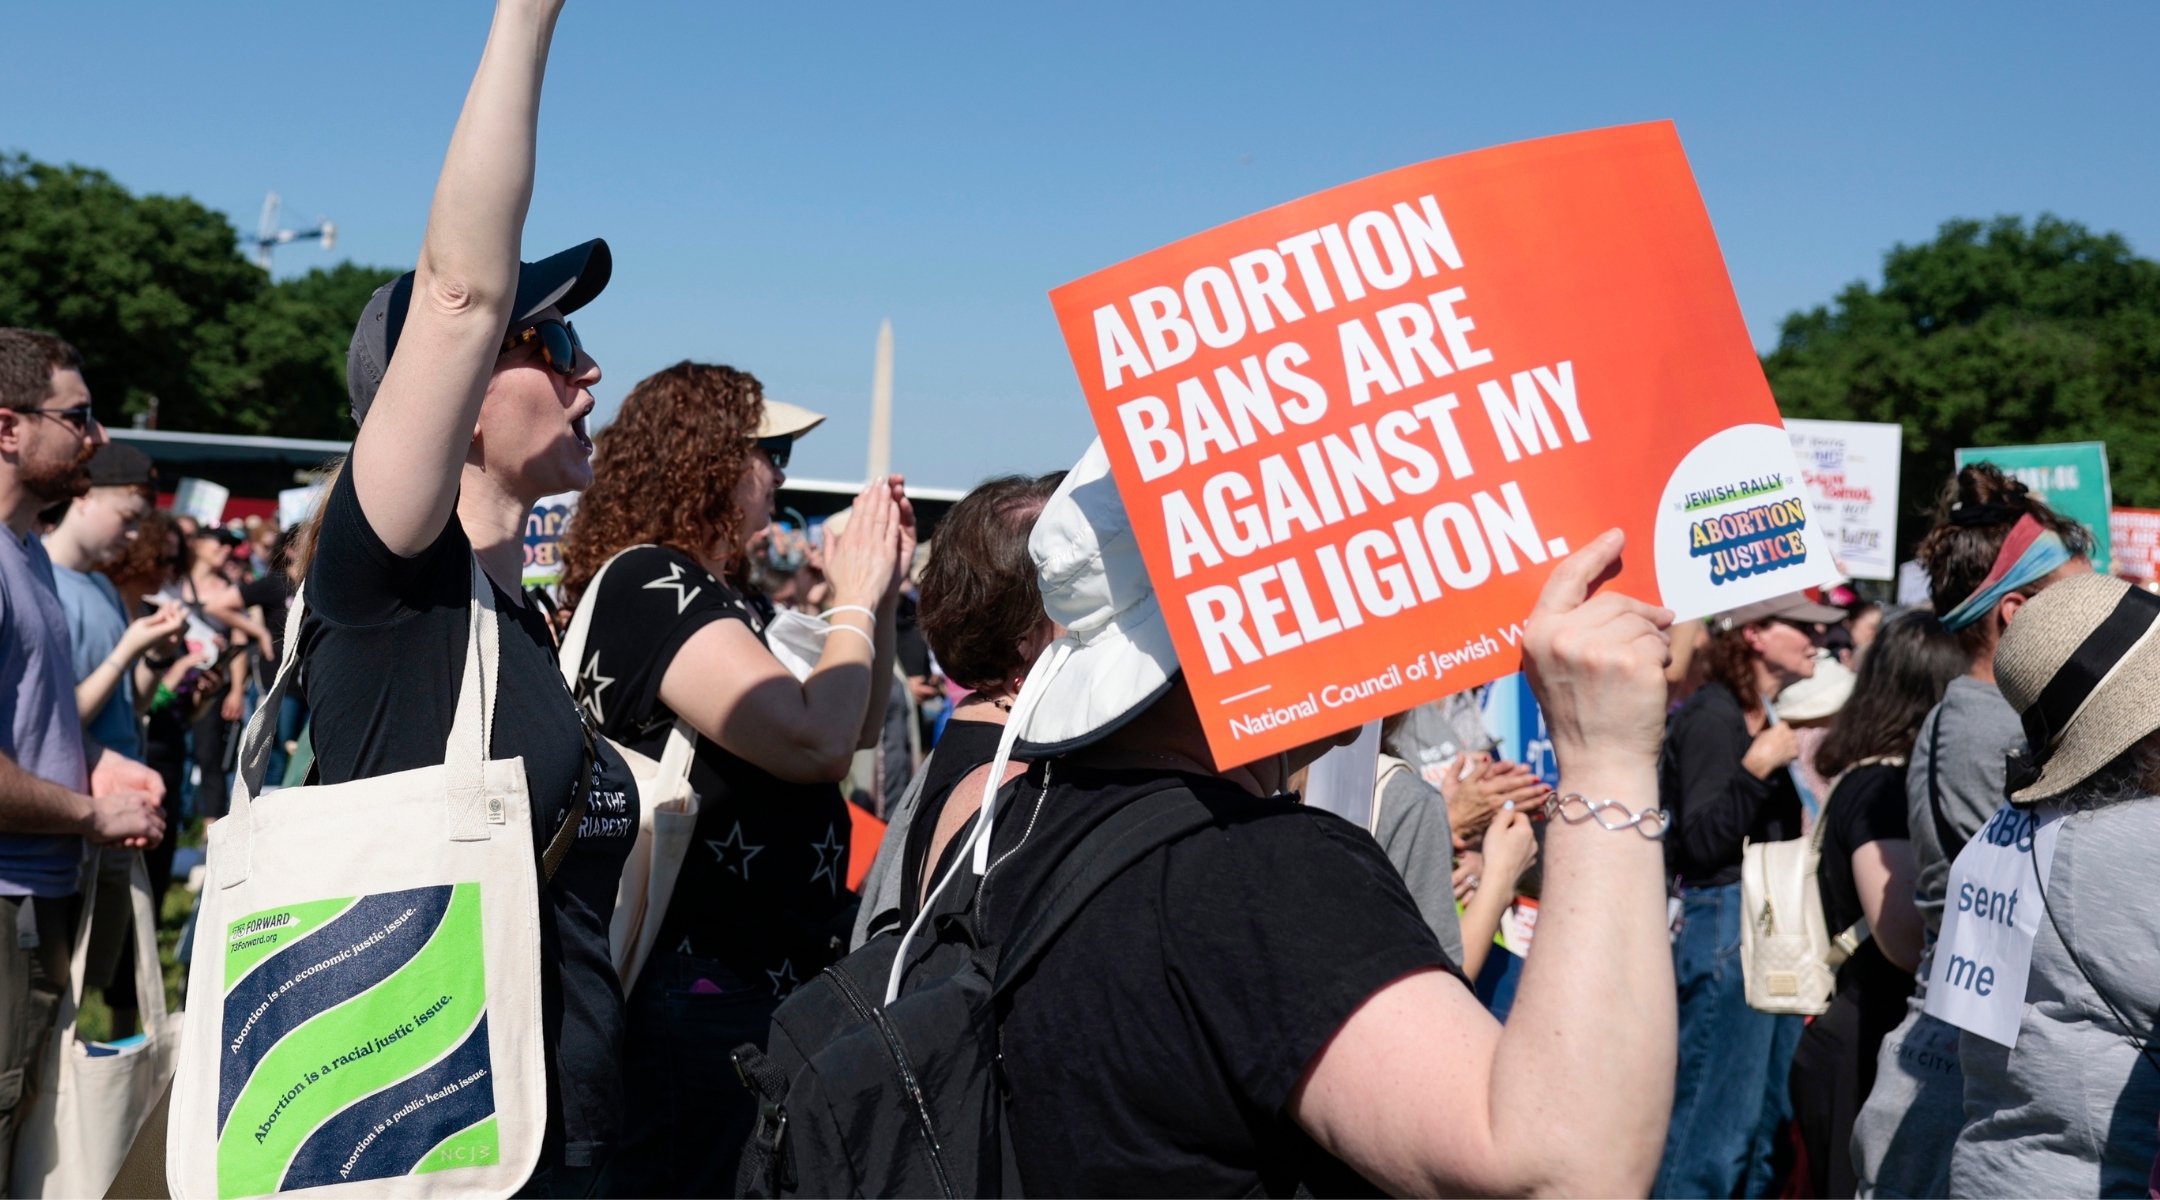 A protestor holds a sign saying “Abortion bans are against my religion” at the May 2022 Jewish Rally For Abortion Justice in Washington, D.C. (Anna Moneymaker via Getty)